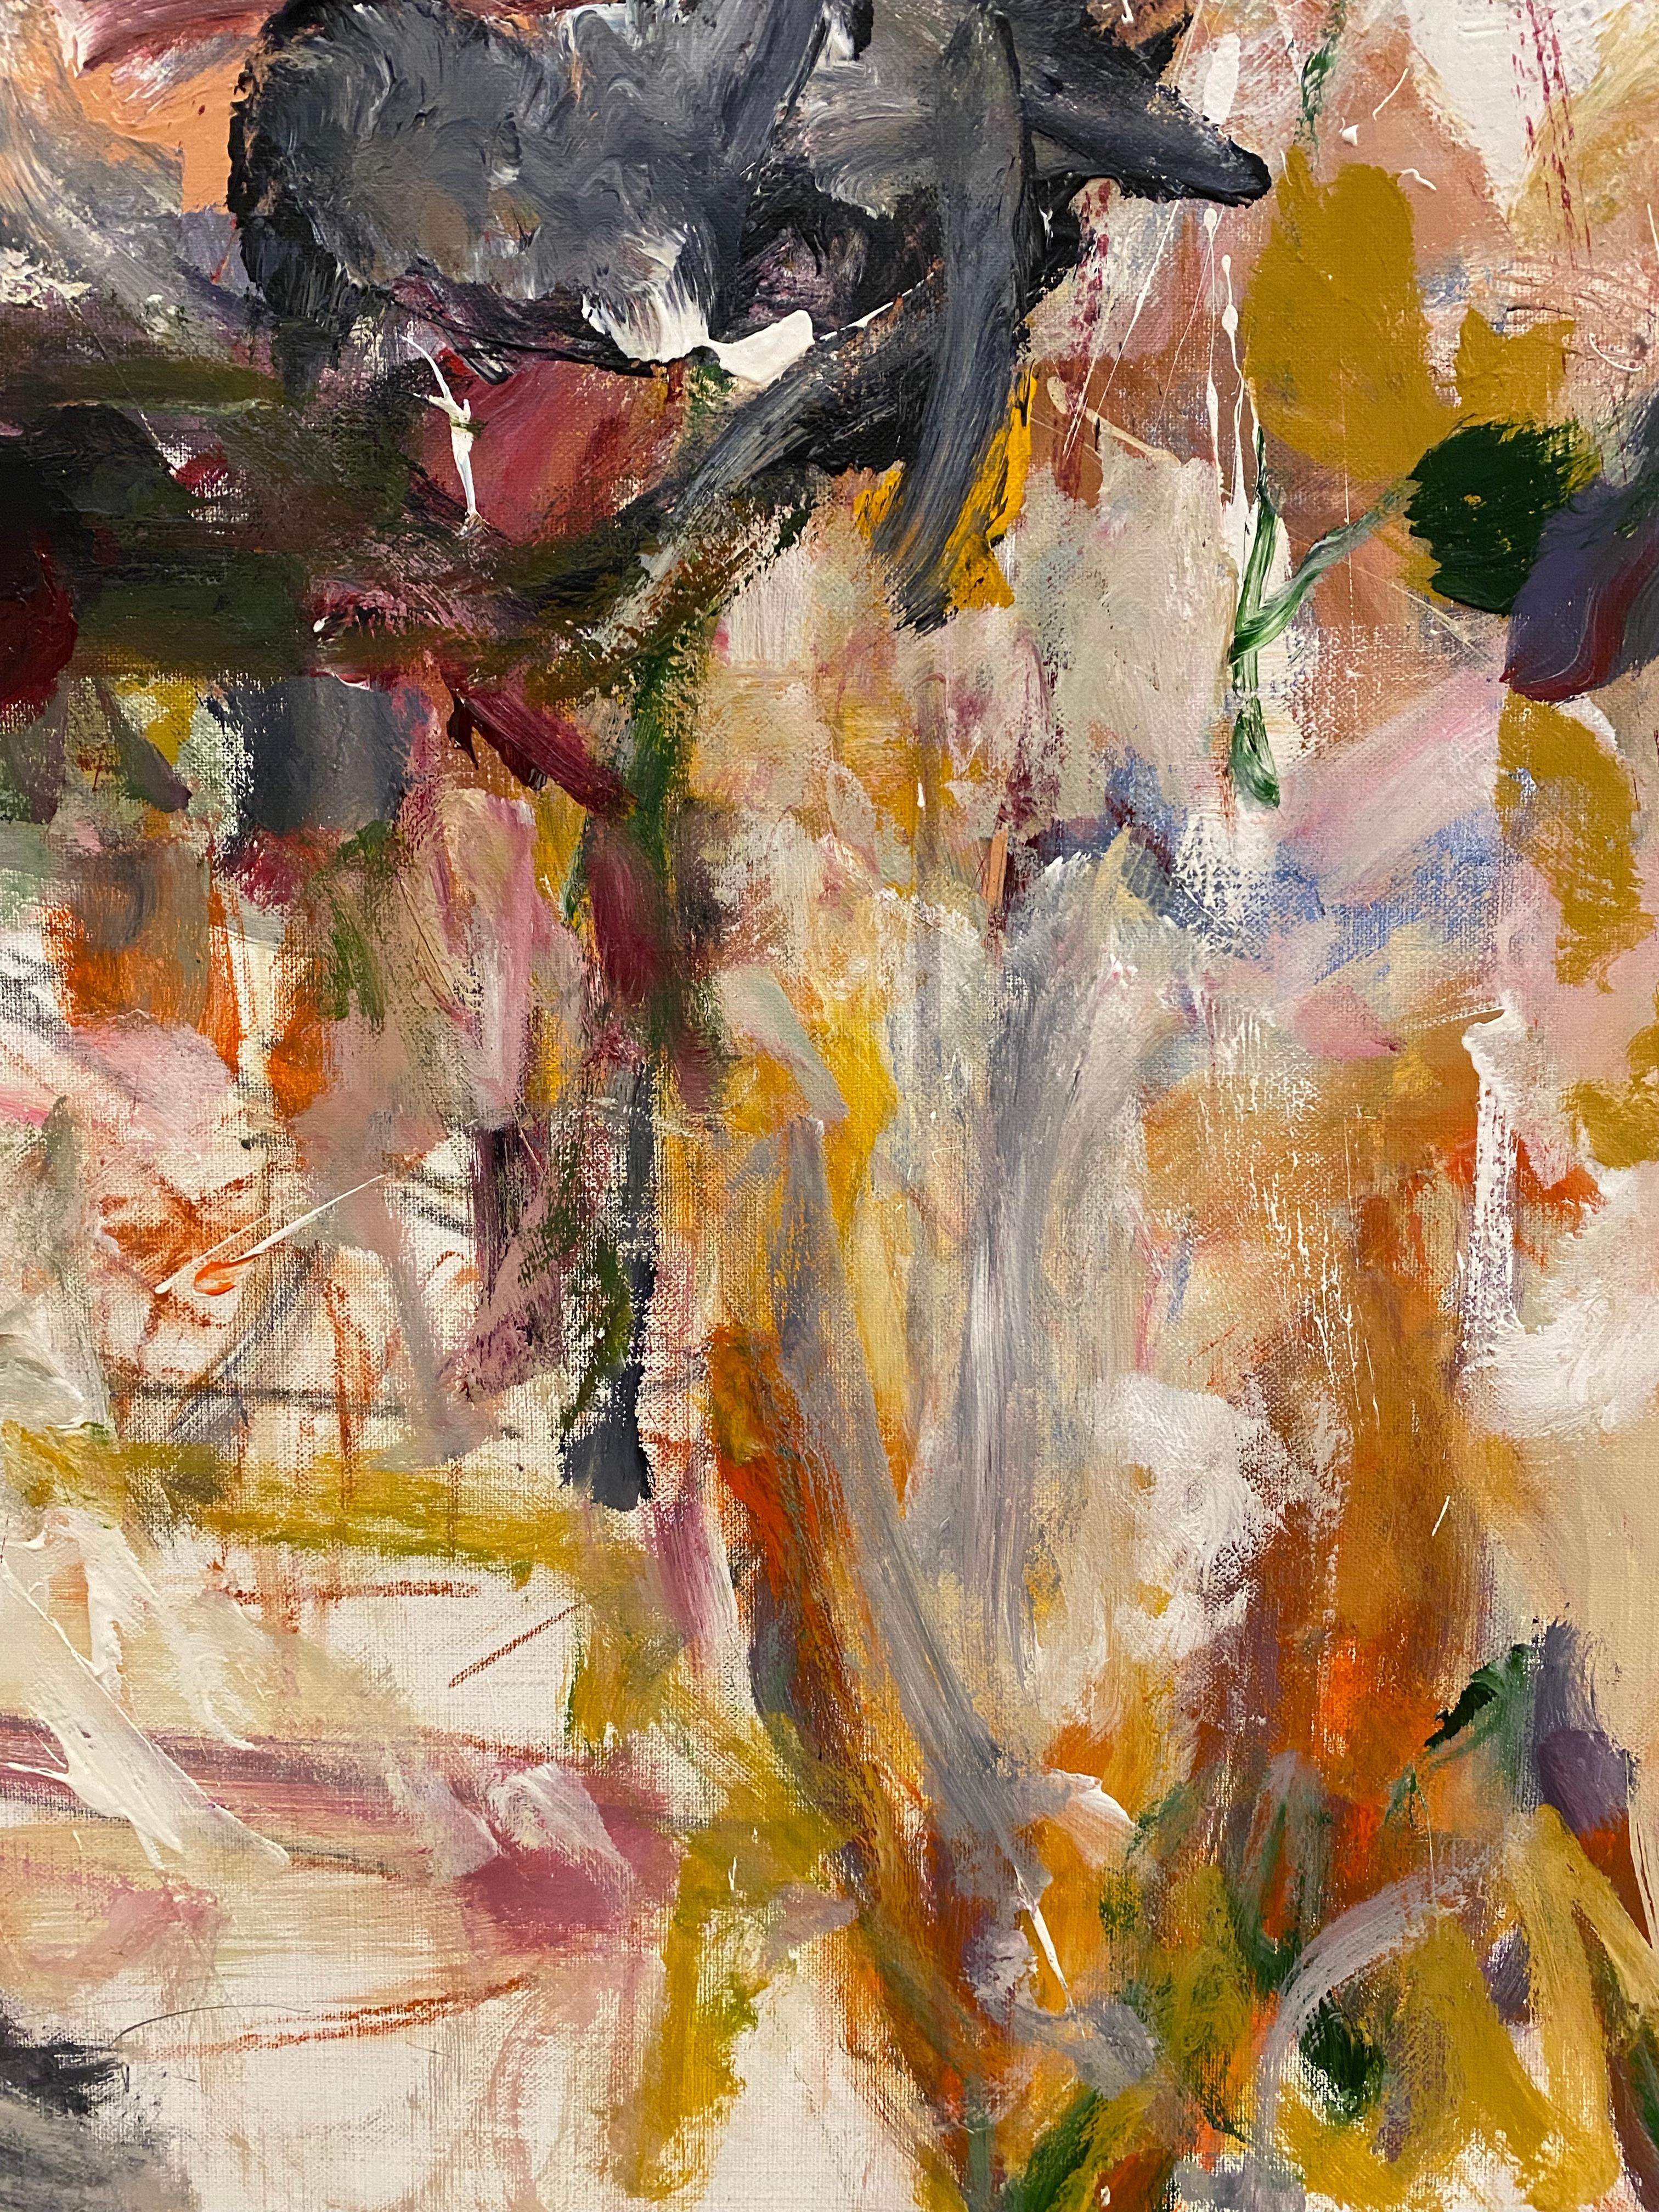 Words Of A Story  - Abstract Expressionist Painting by Lloyd Tabing